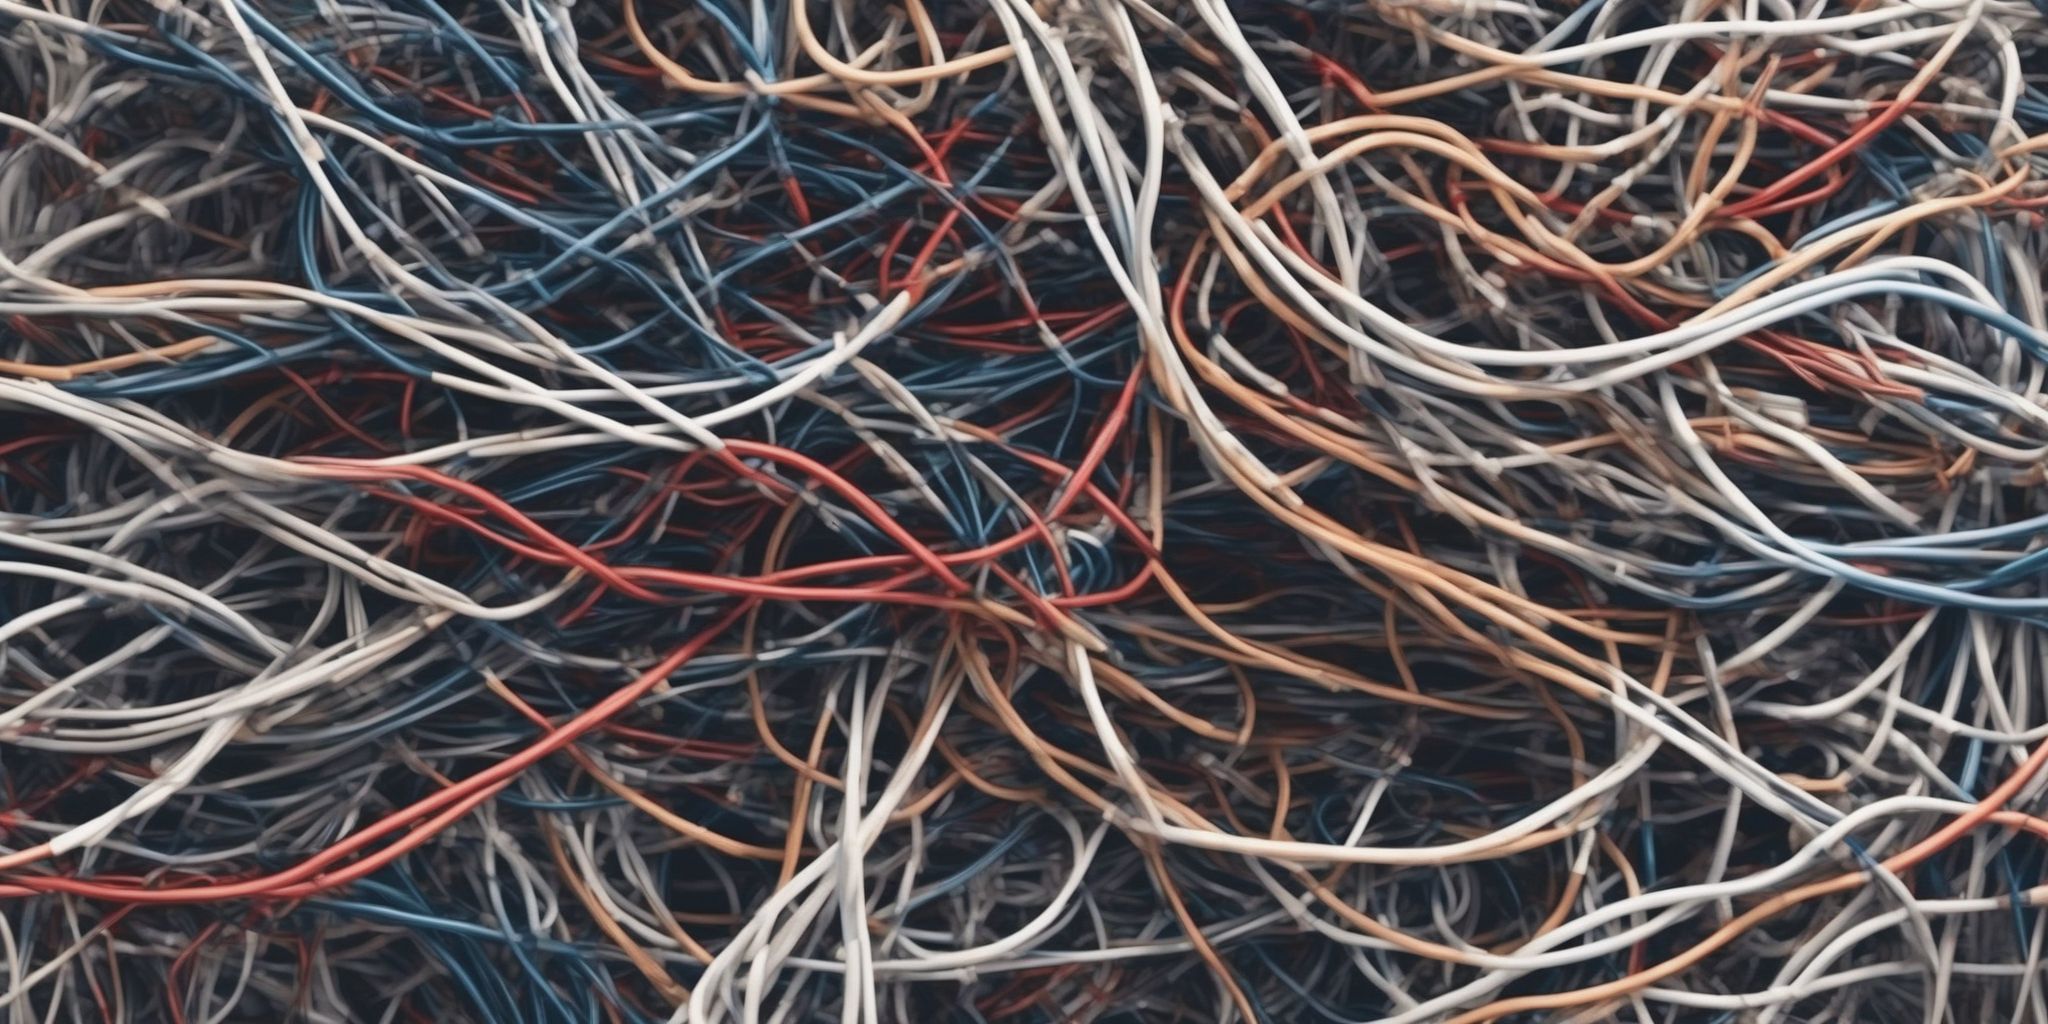 Tangled wires  in realistic, photographic style